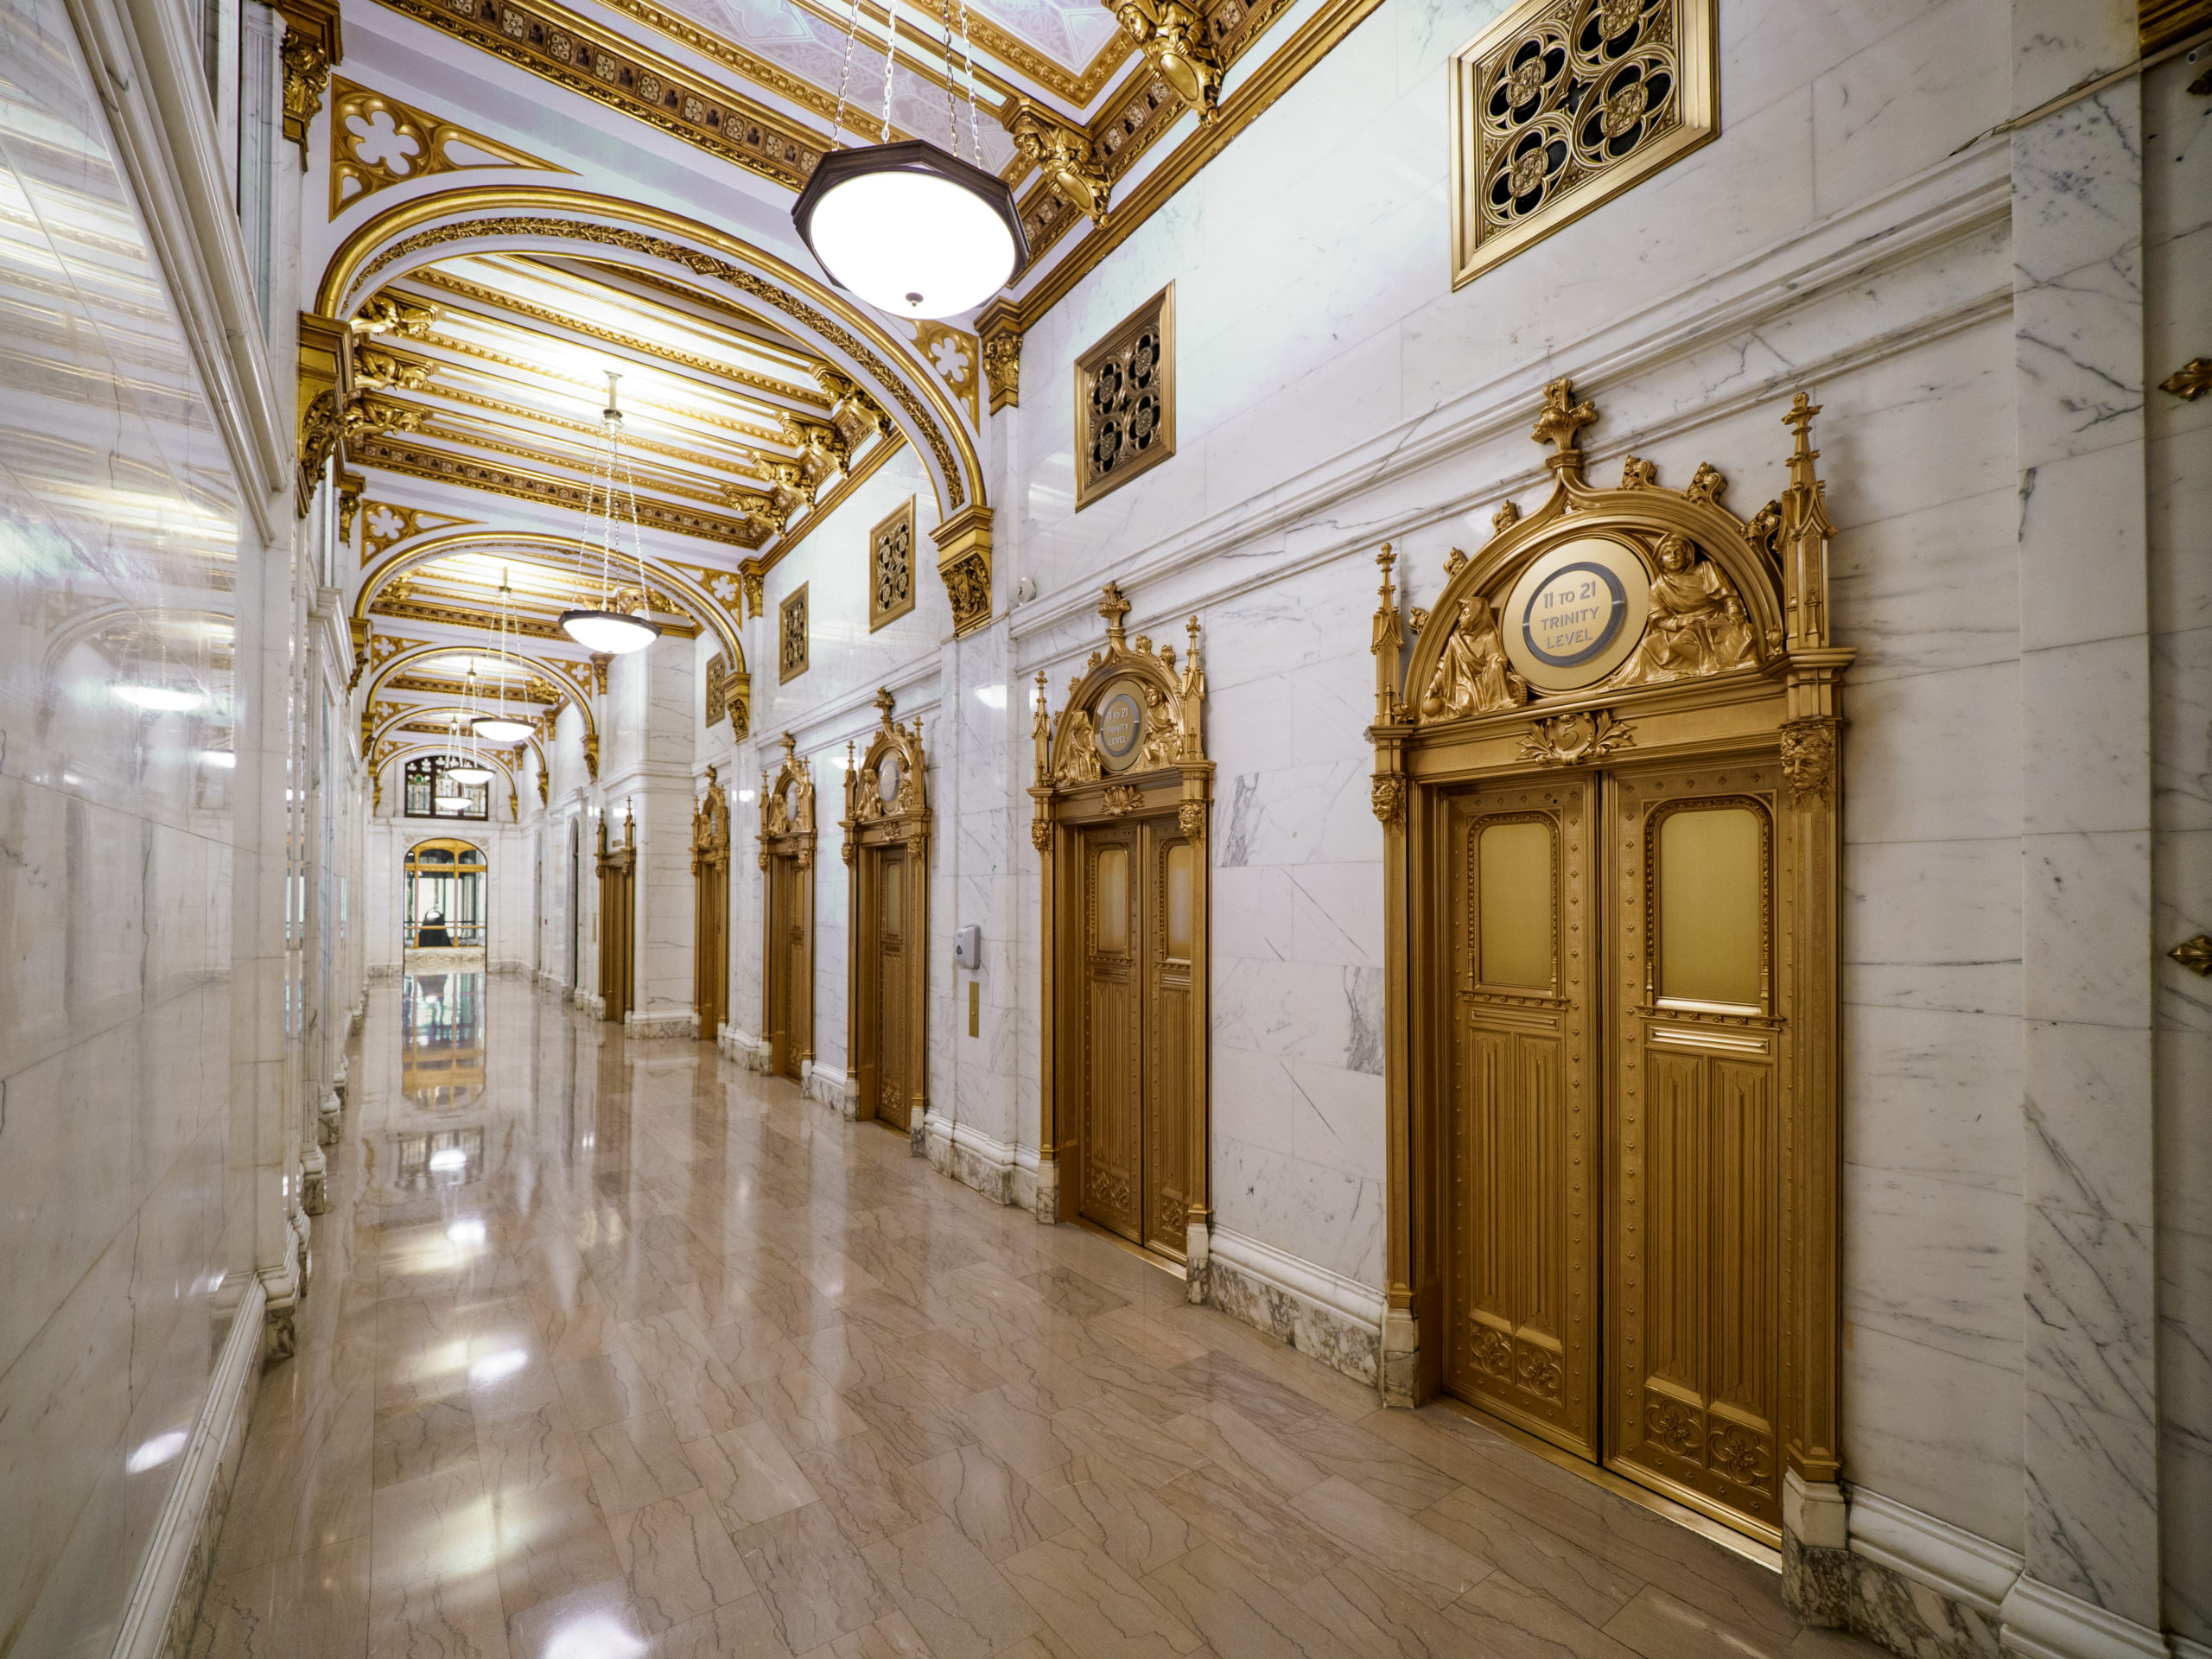 Ornate marble hallway inside the Trinity Building; doors, fixtures, and crown moulding are painted gold.